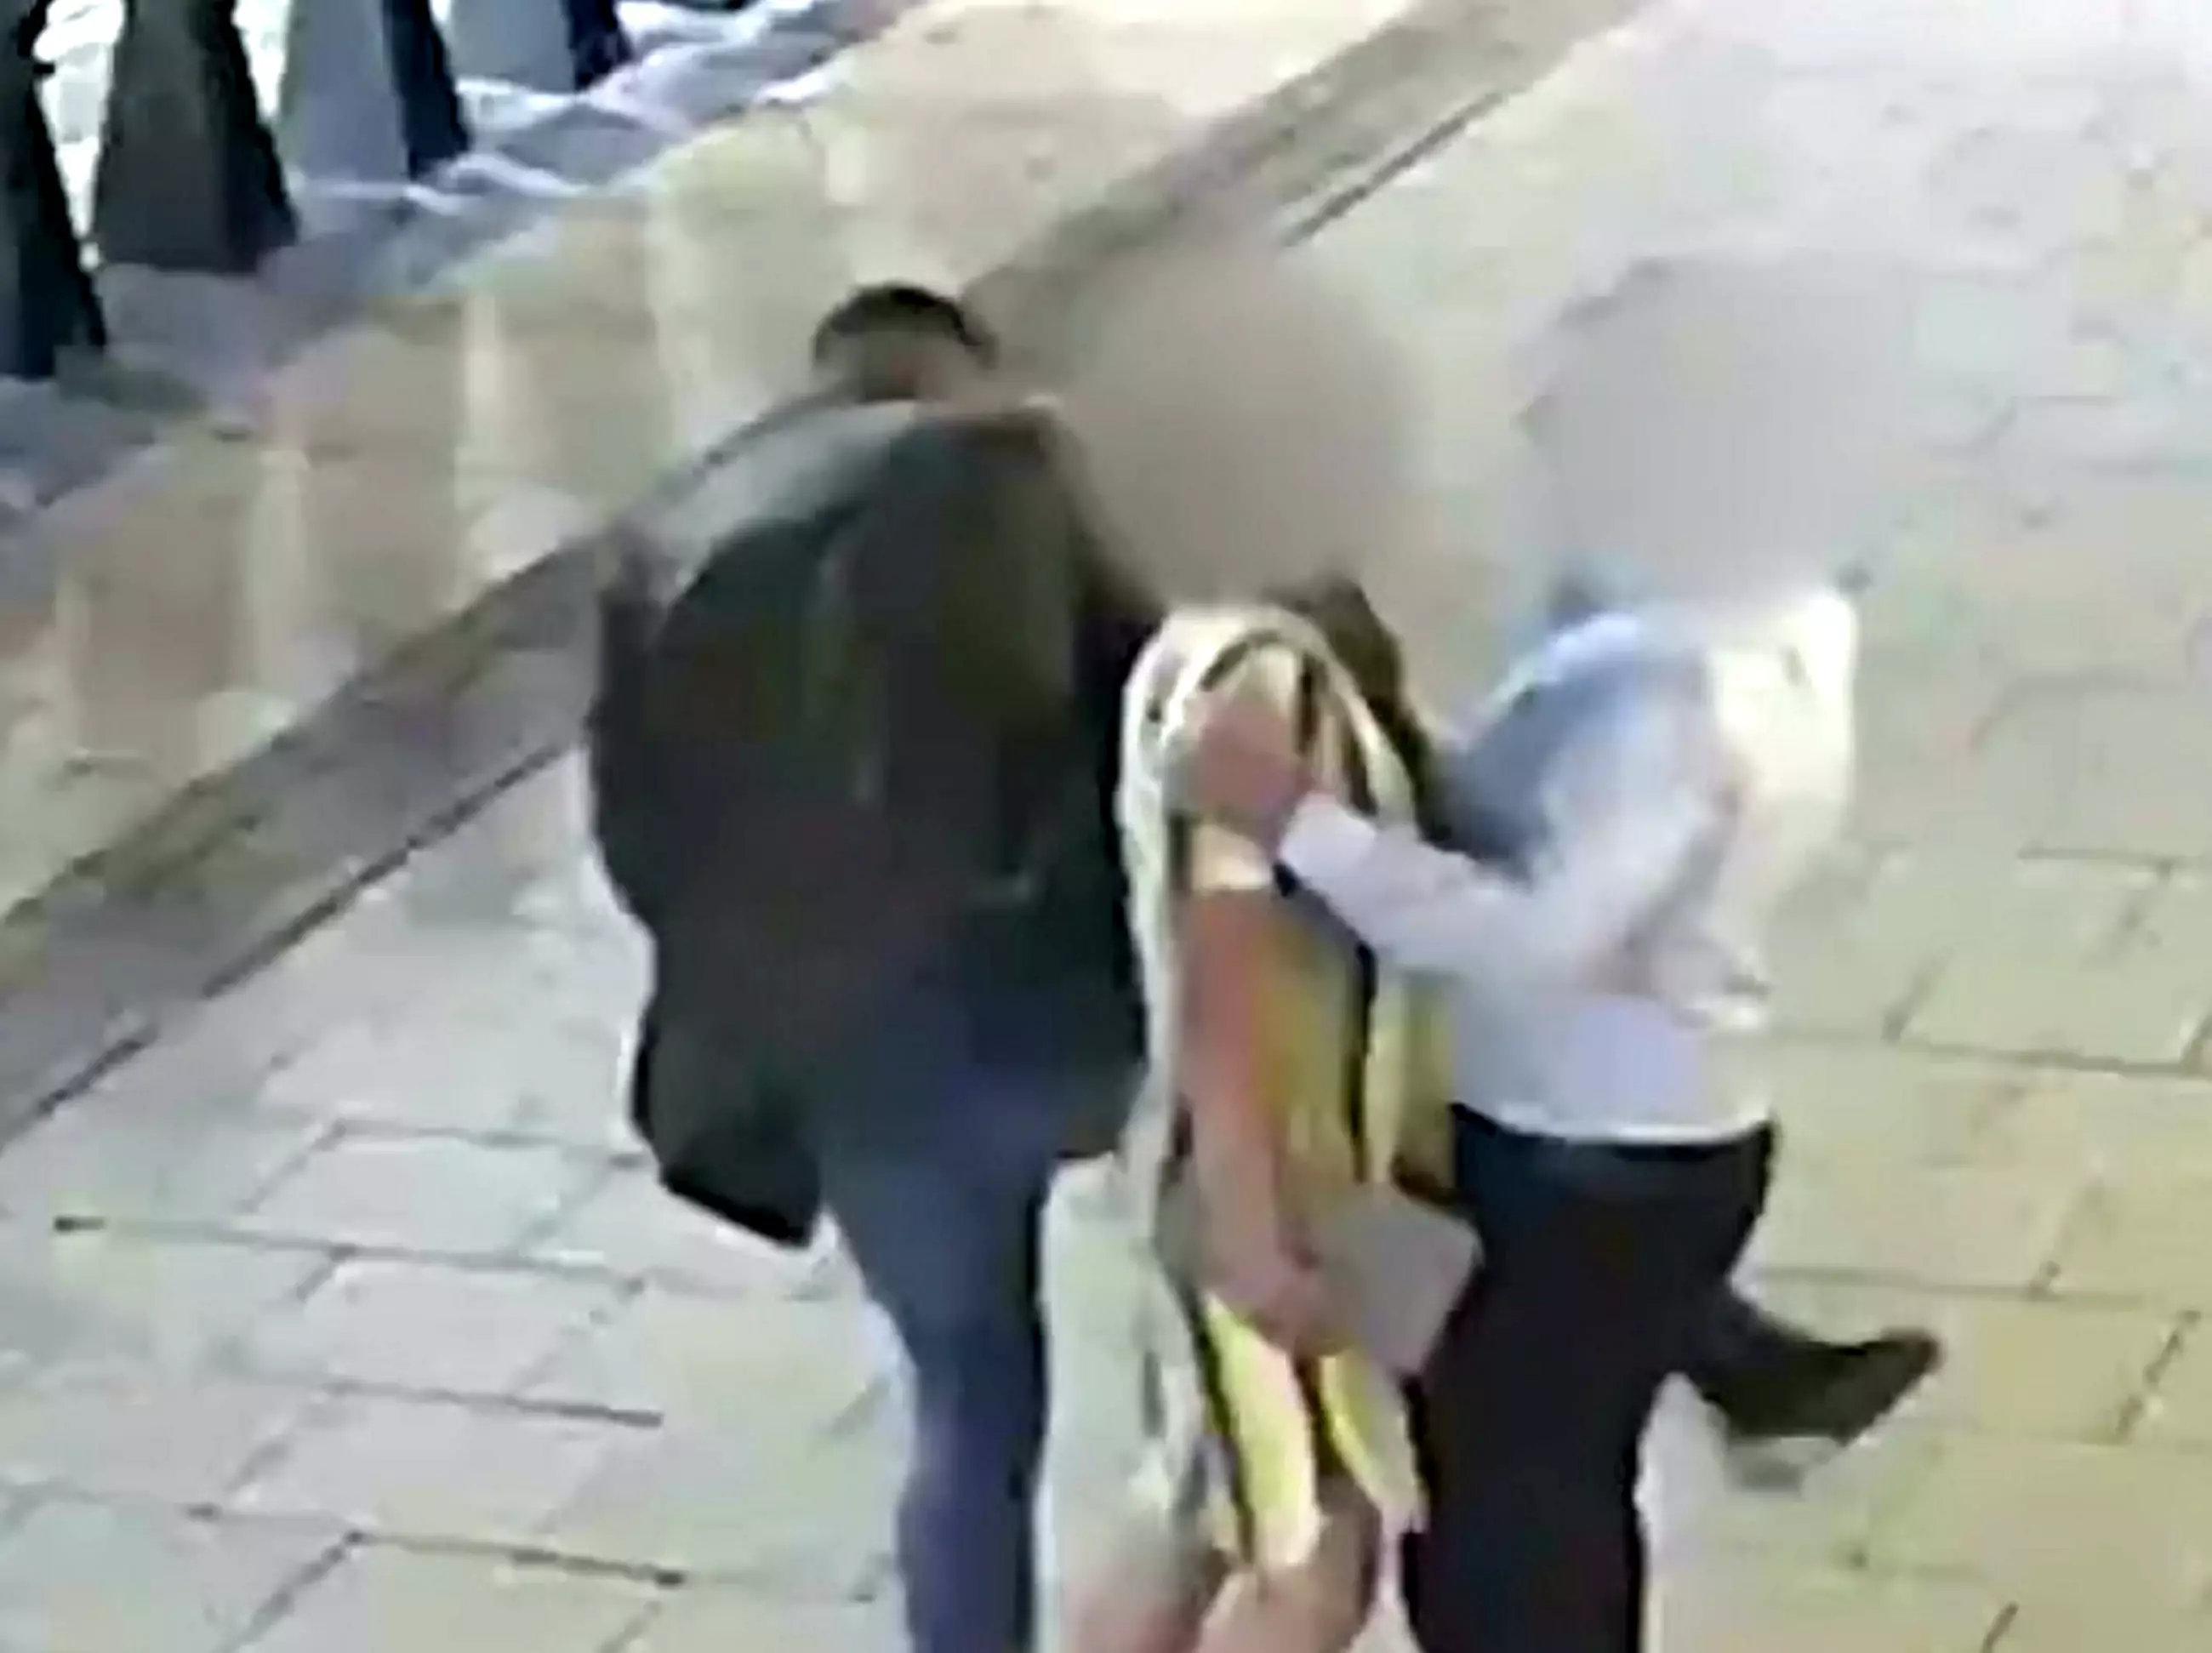 The pickpocket using the distraction technique known as the 'Ronaldinho'.